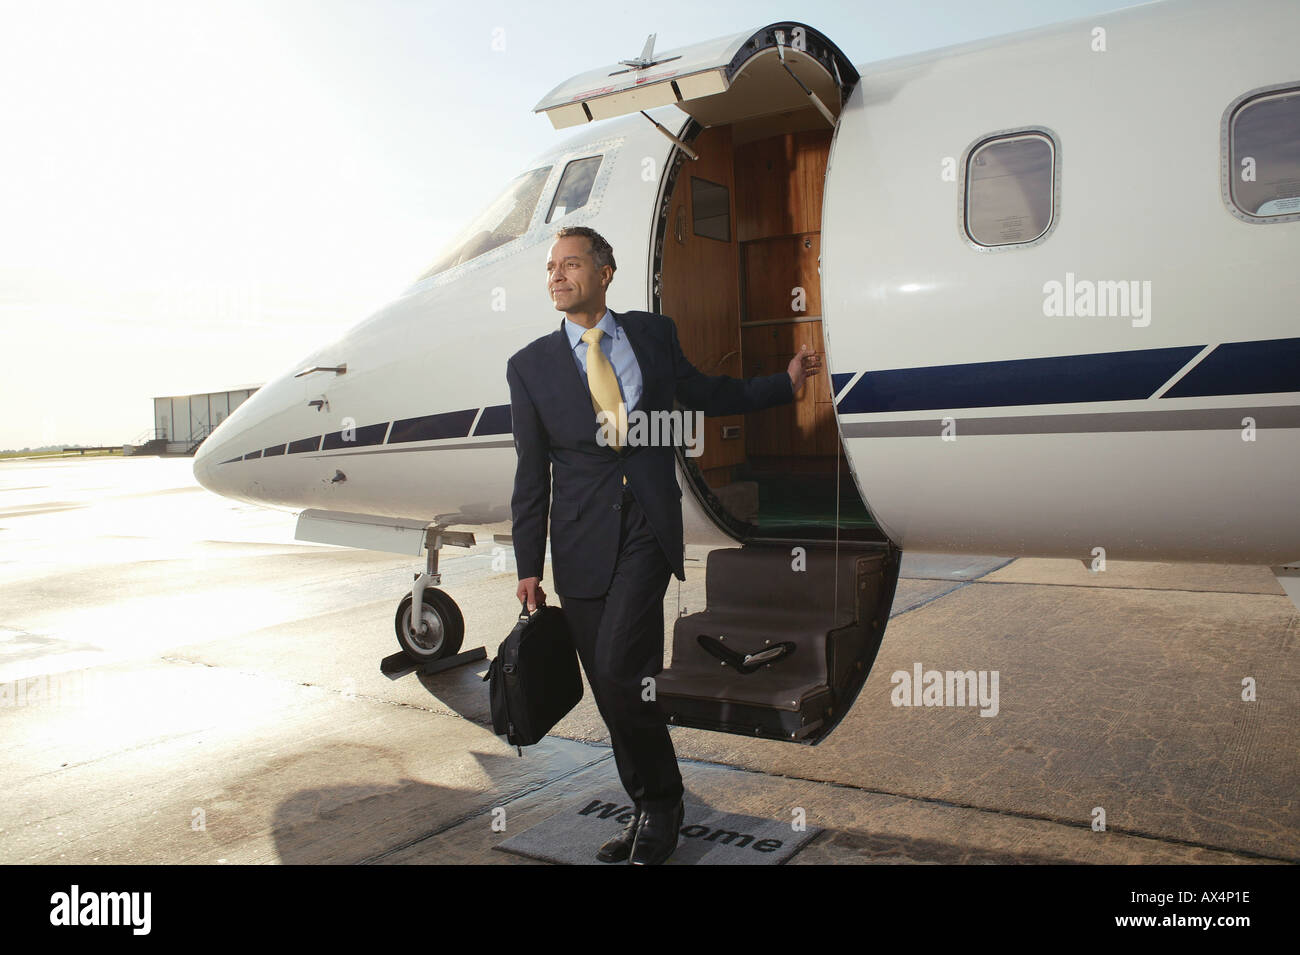 Businessman boarding a private airplane Stock Photo